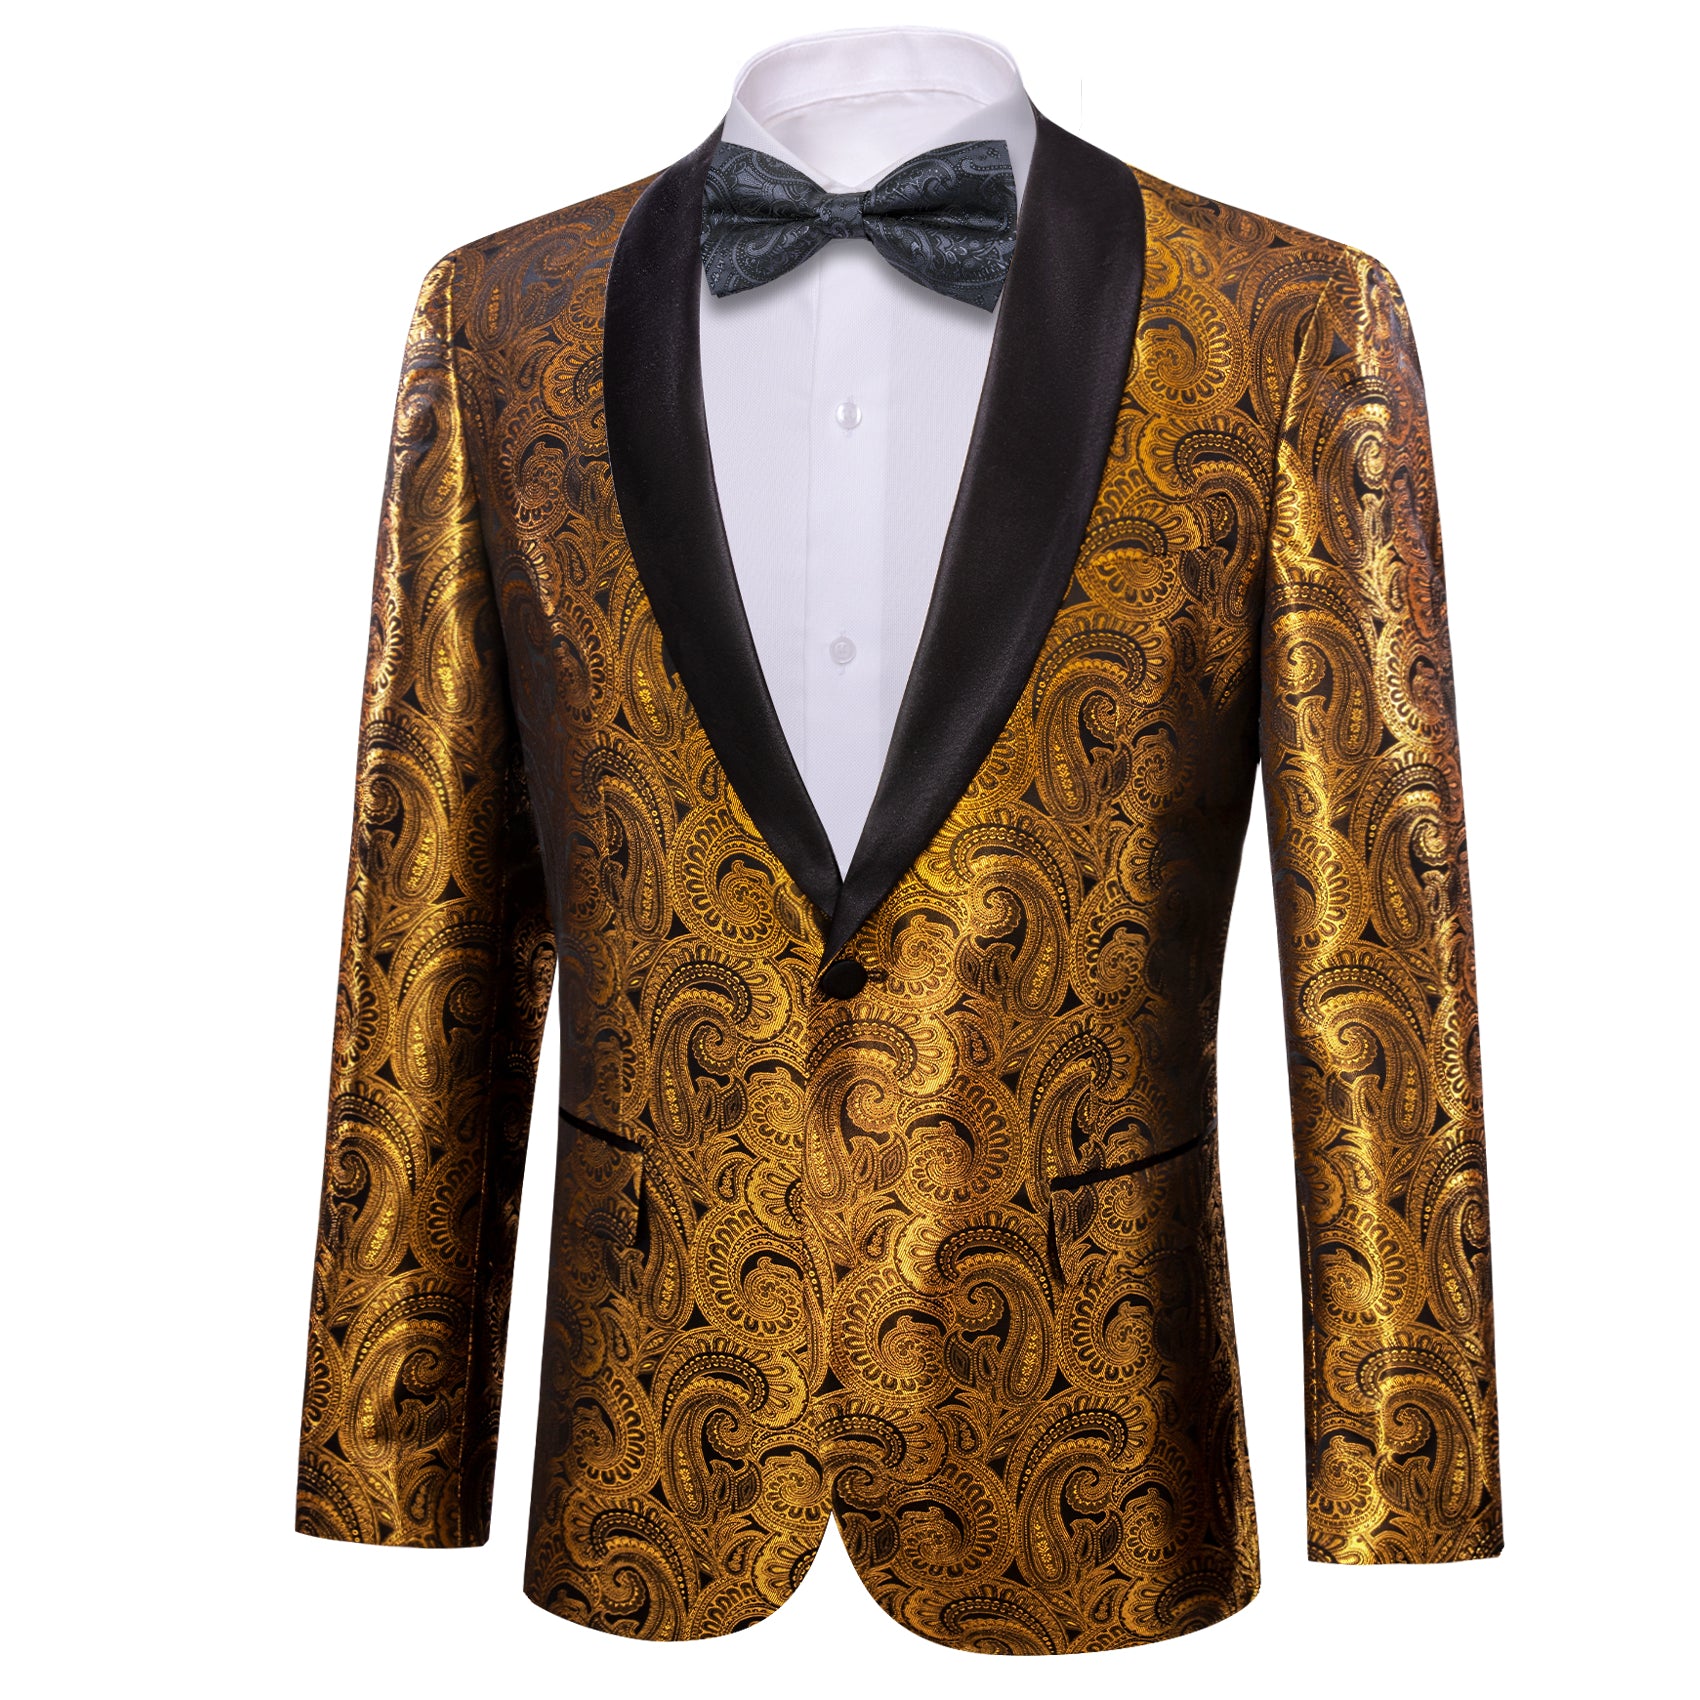 Barry Wang Men's Blazer Brown Gold Floral One Button Stylish Suit